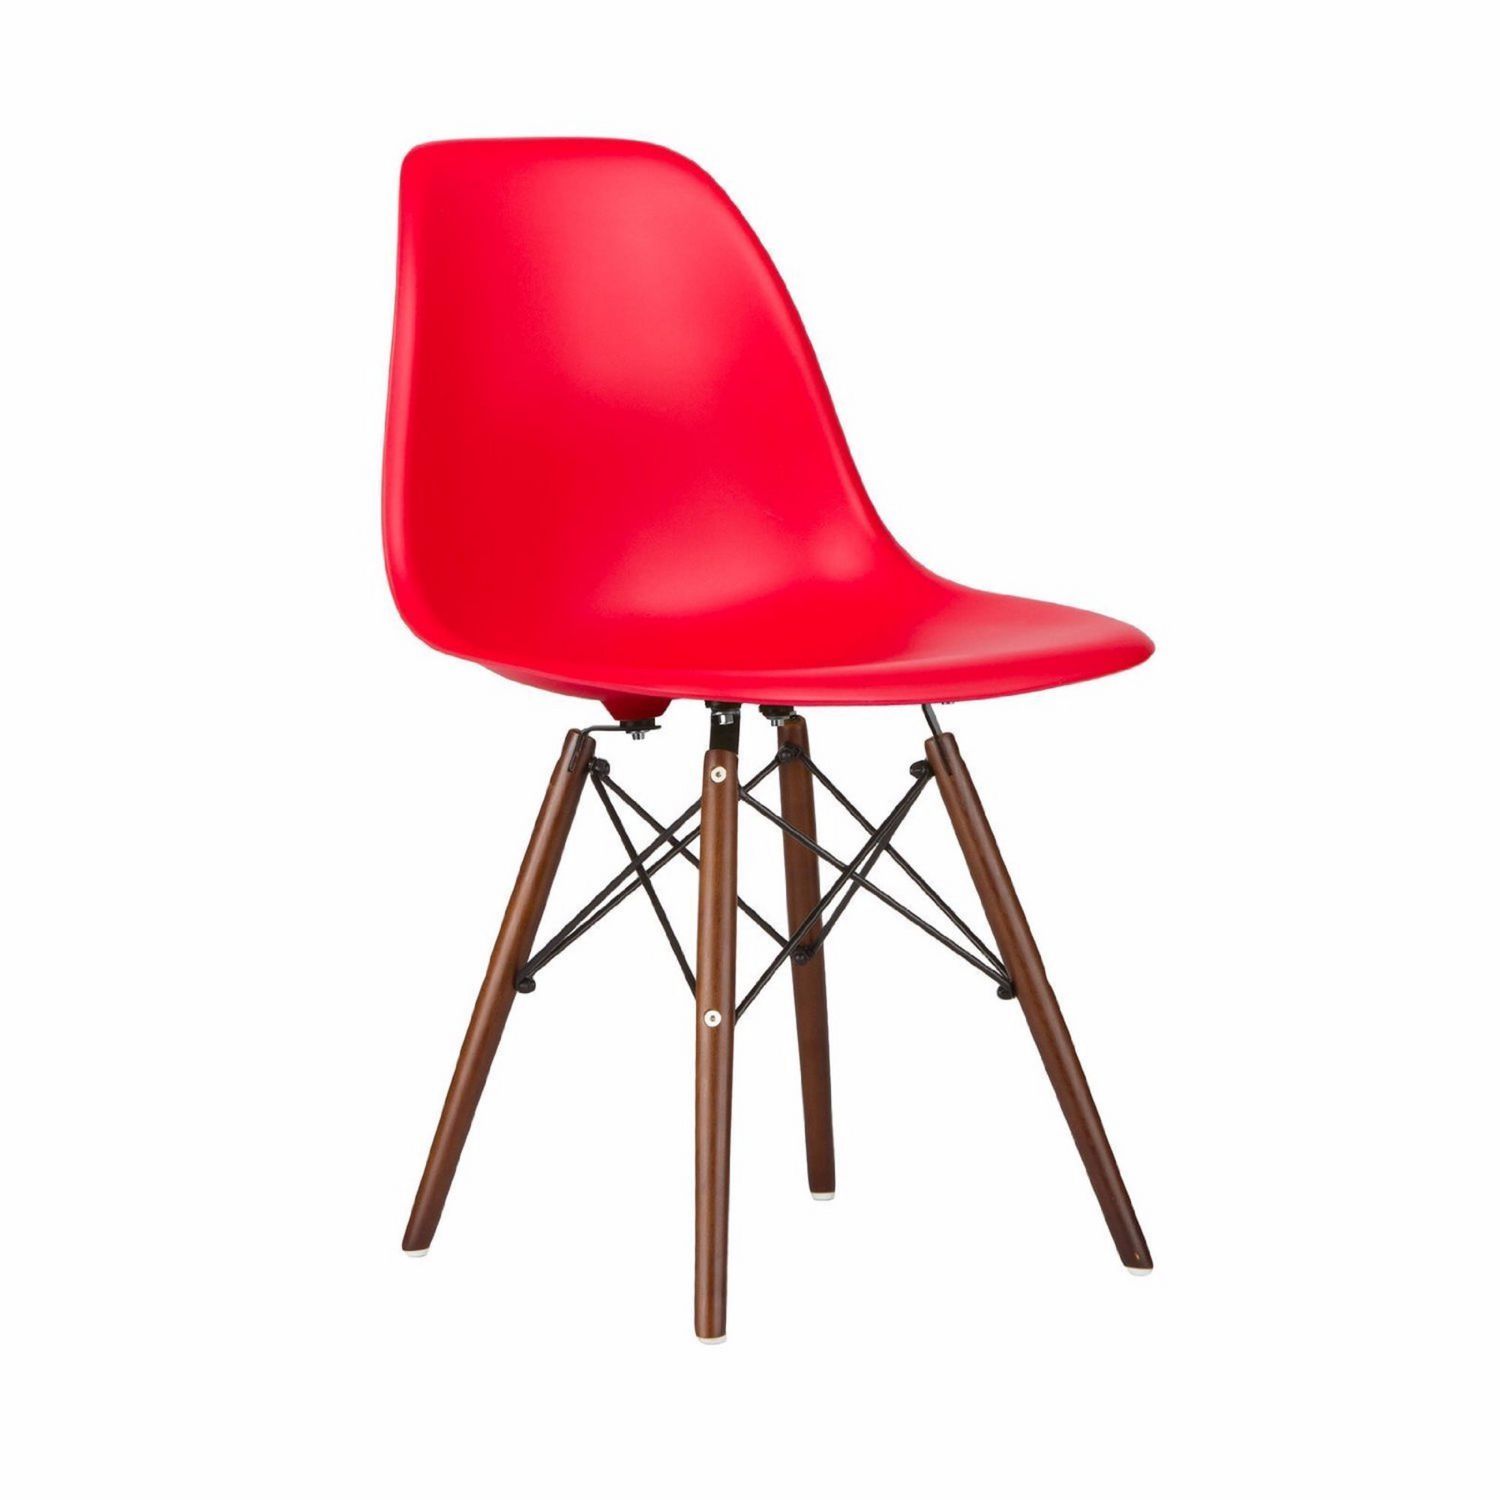 Nicer Furniture Red Eames Dsw Wooden Legs Arm Chair | Walmart Canada